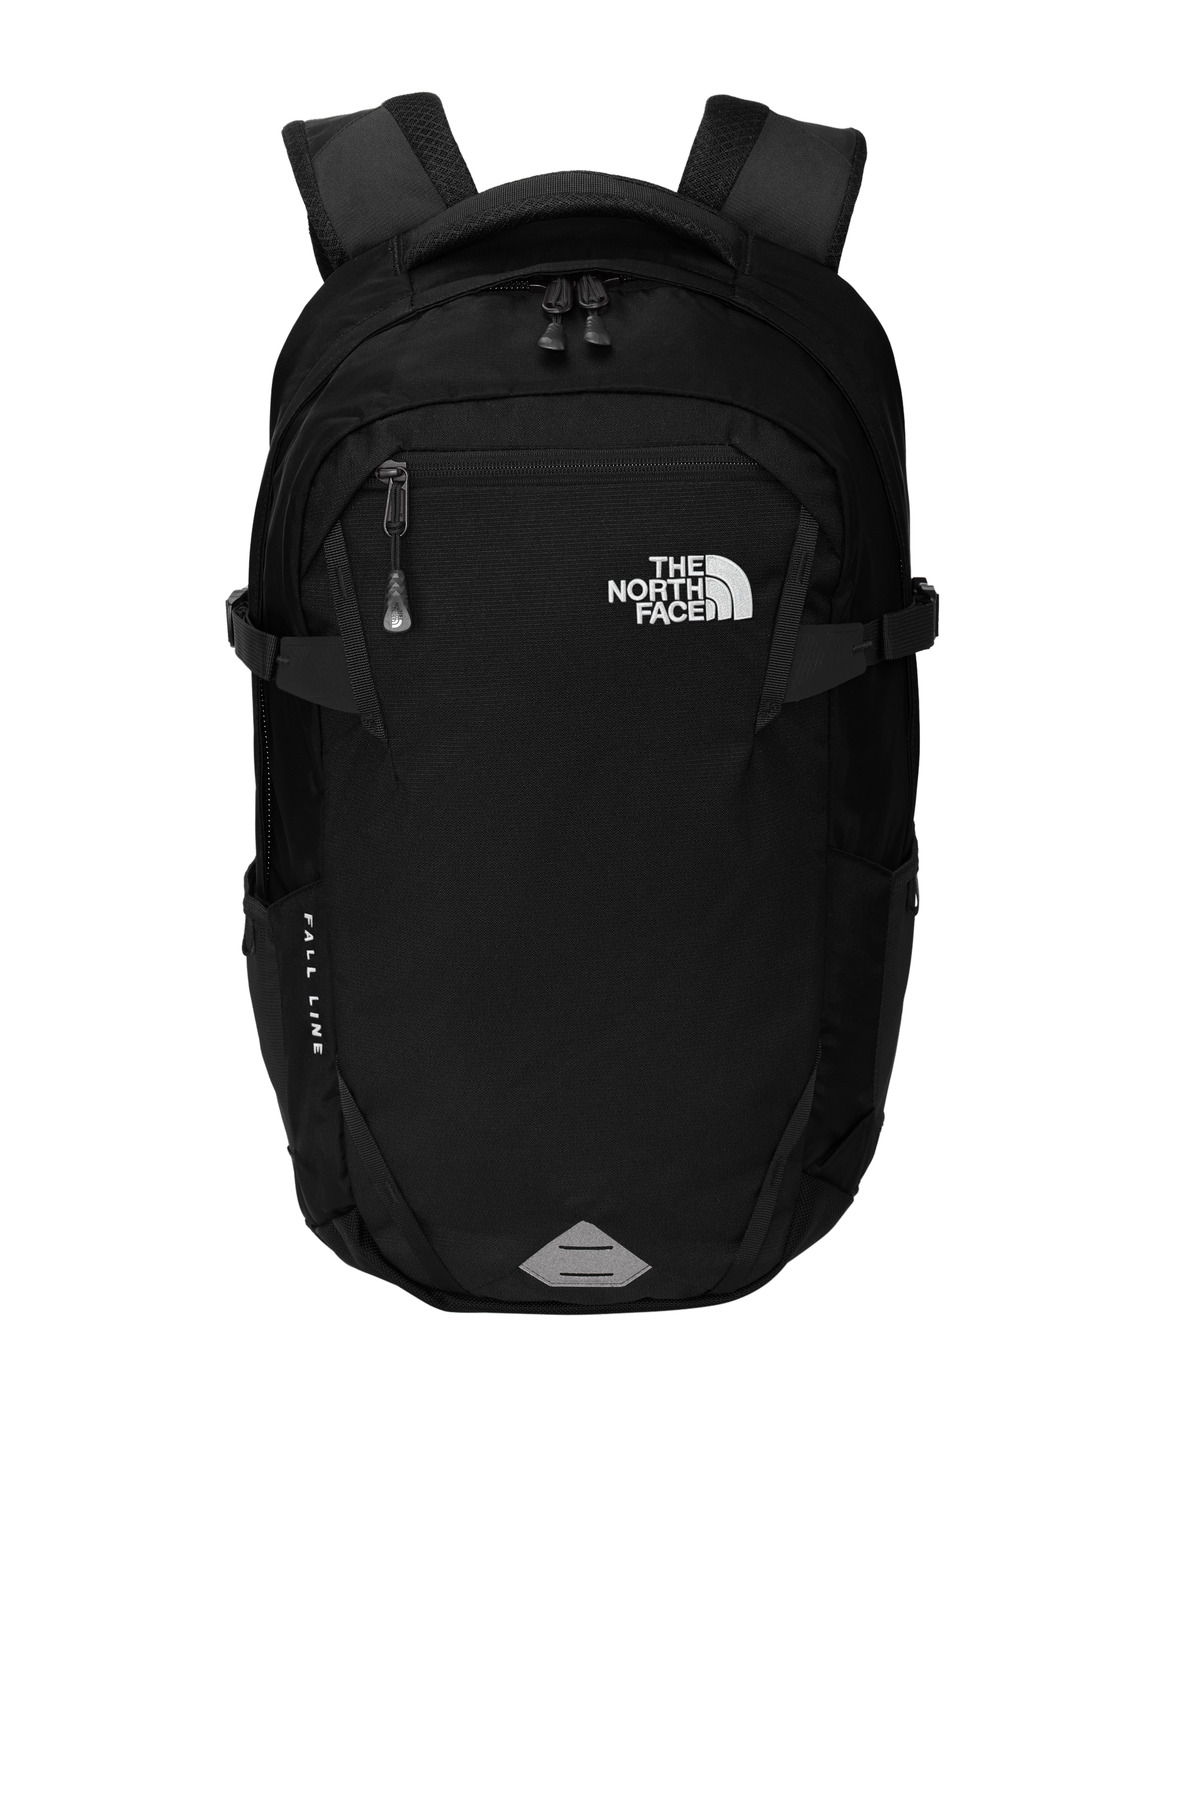 The North Face Fall Line Backpack-The North Face